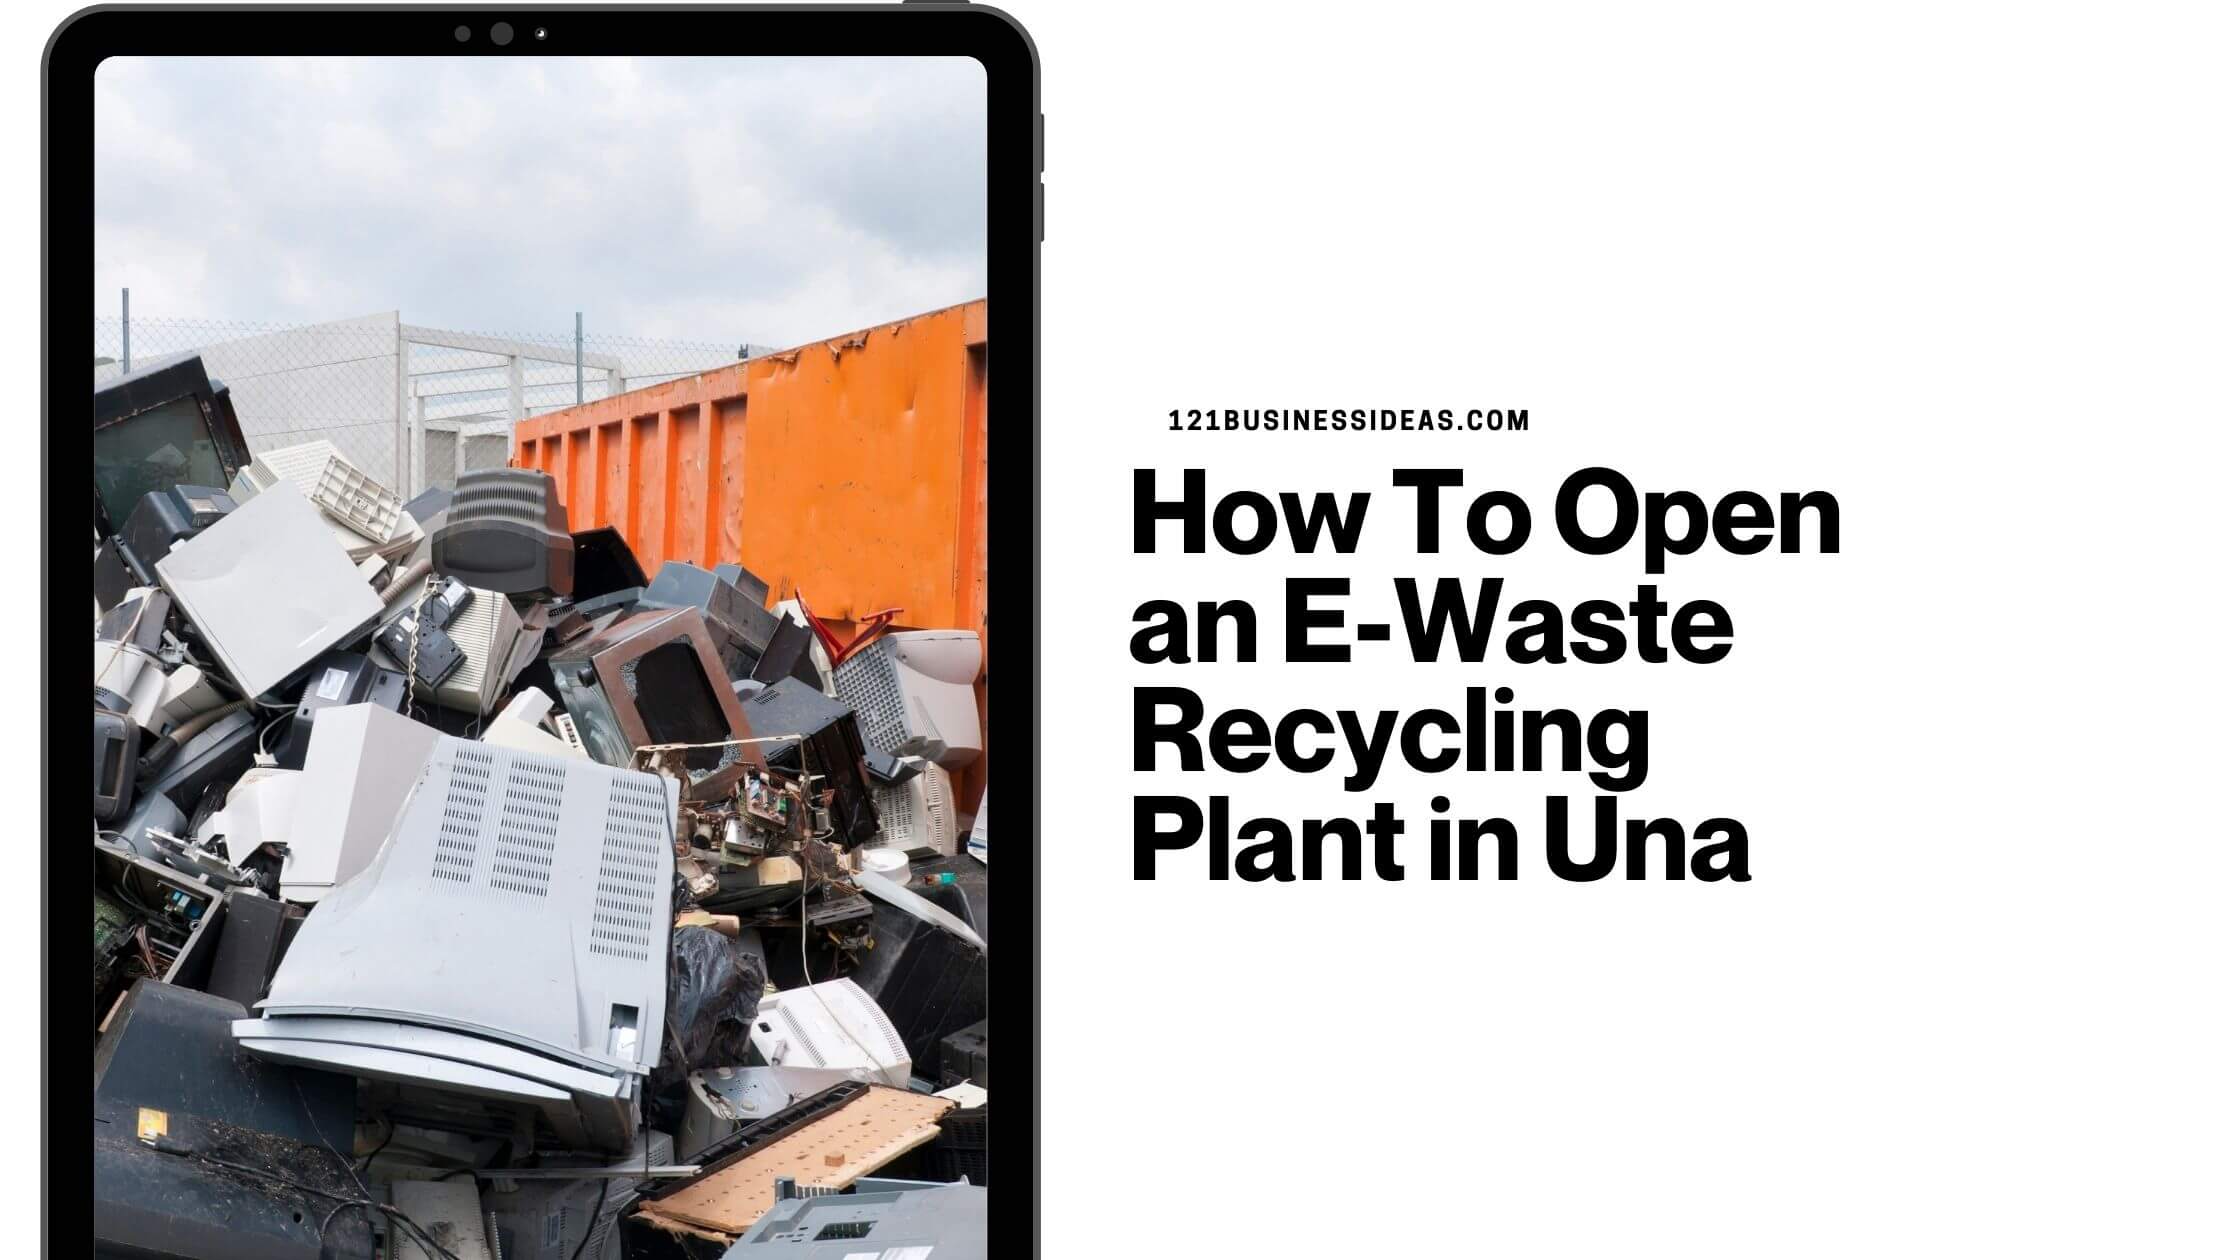 How To Open an E-Waste Recycling Plant in Una (1)